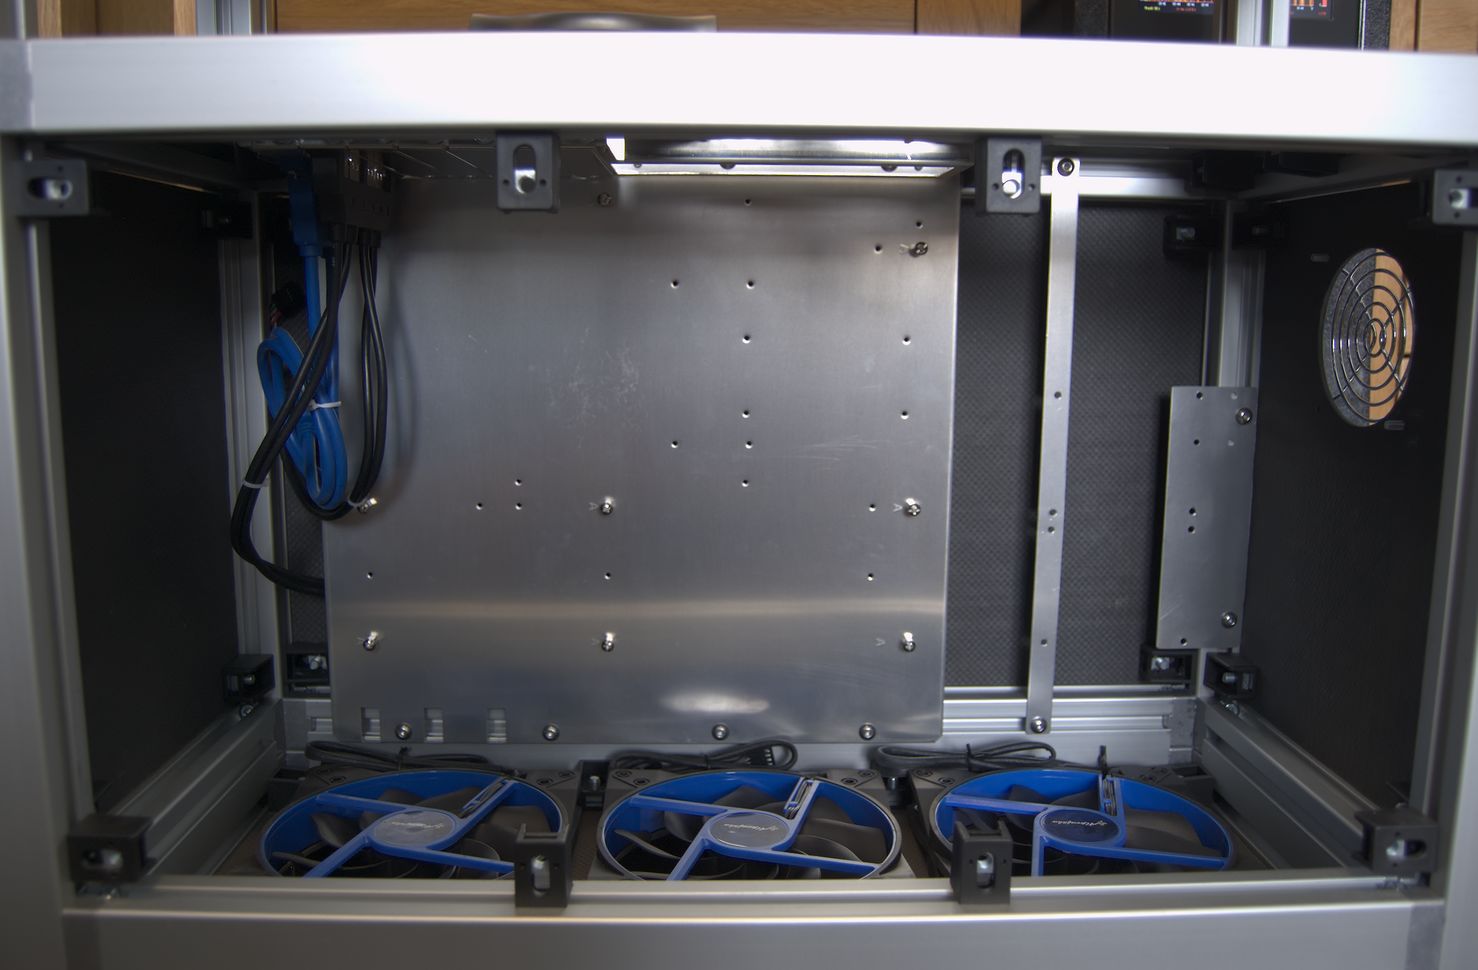 Inside the case, showing the motherboard tray at the back, and the three large fans along the bottom.